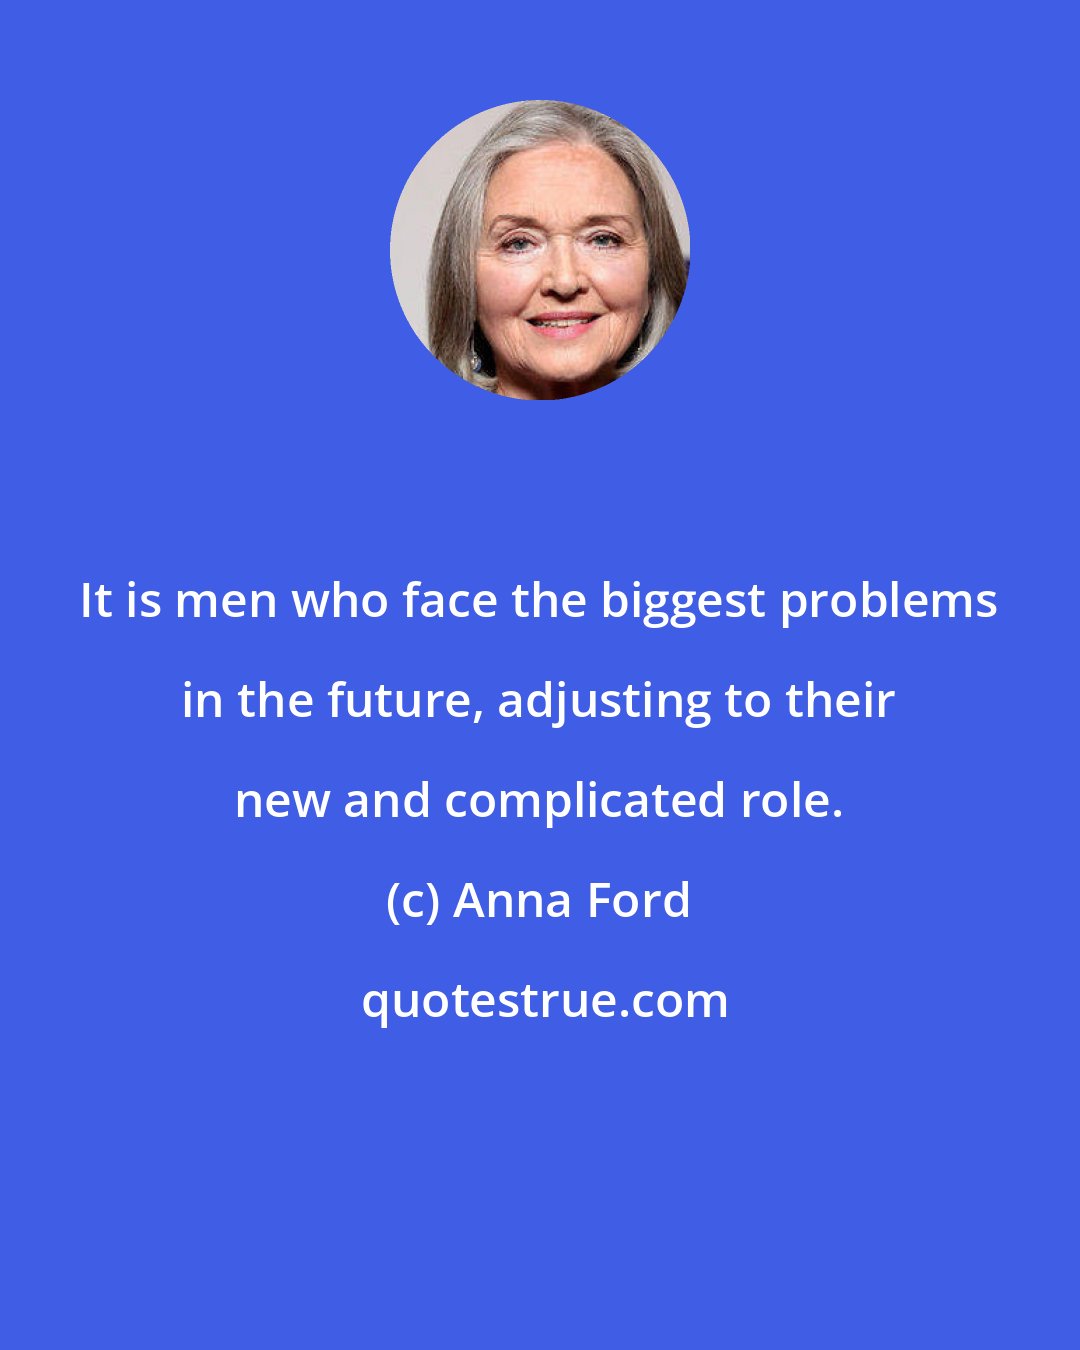 Anna Ford: It is men who face the biggest problems in the future, adjusting to their new and complicated role.